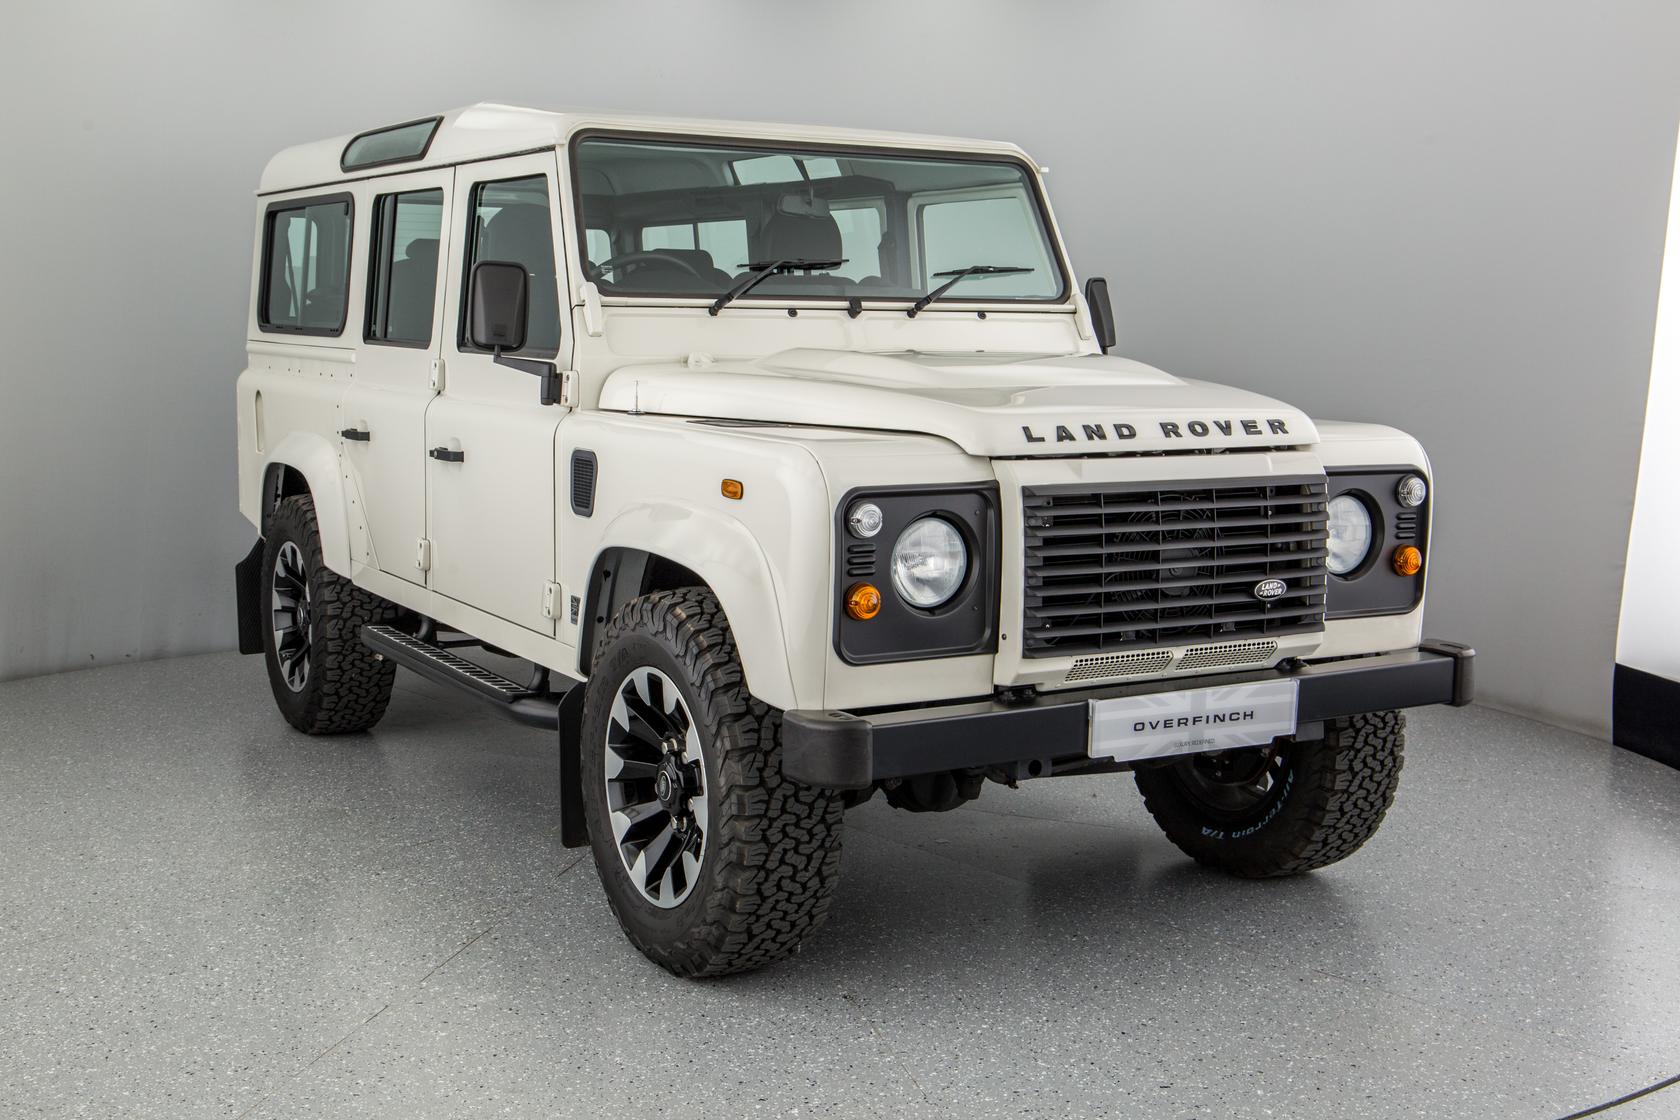 Used Land Rover Defender 110 YL58GME 9